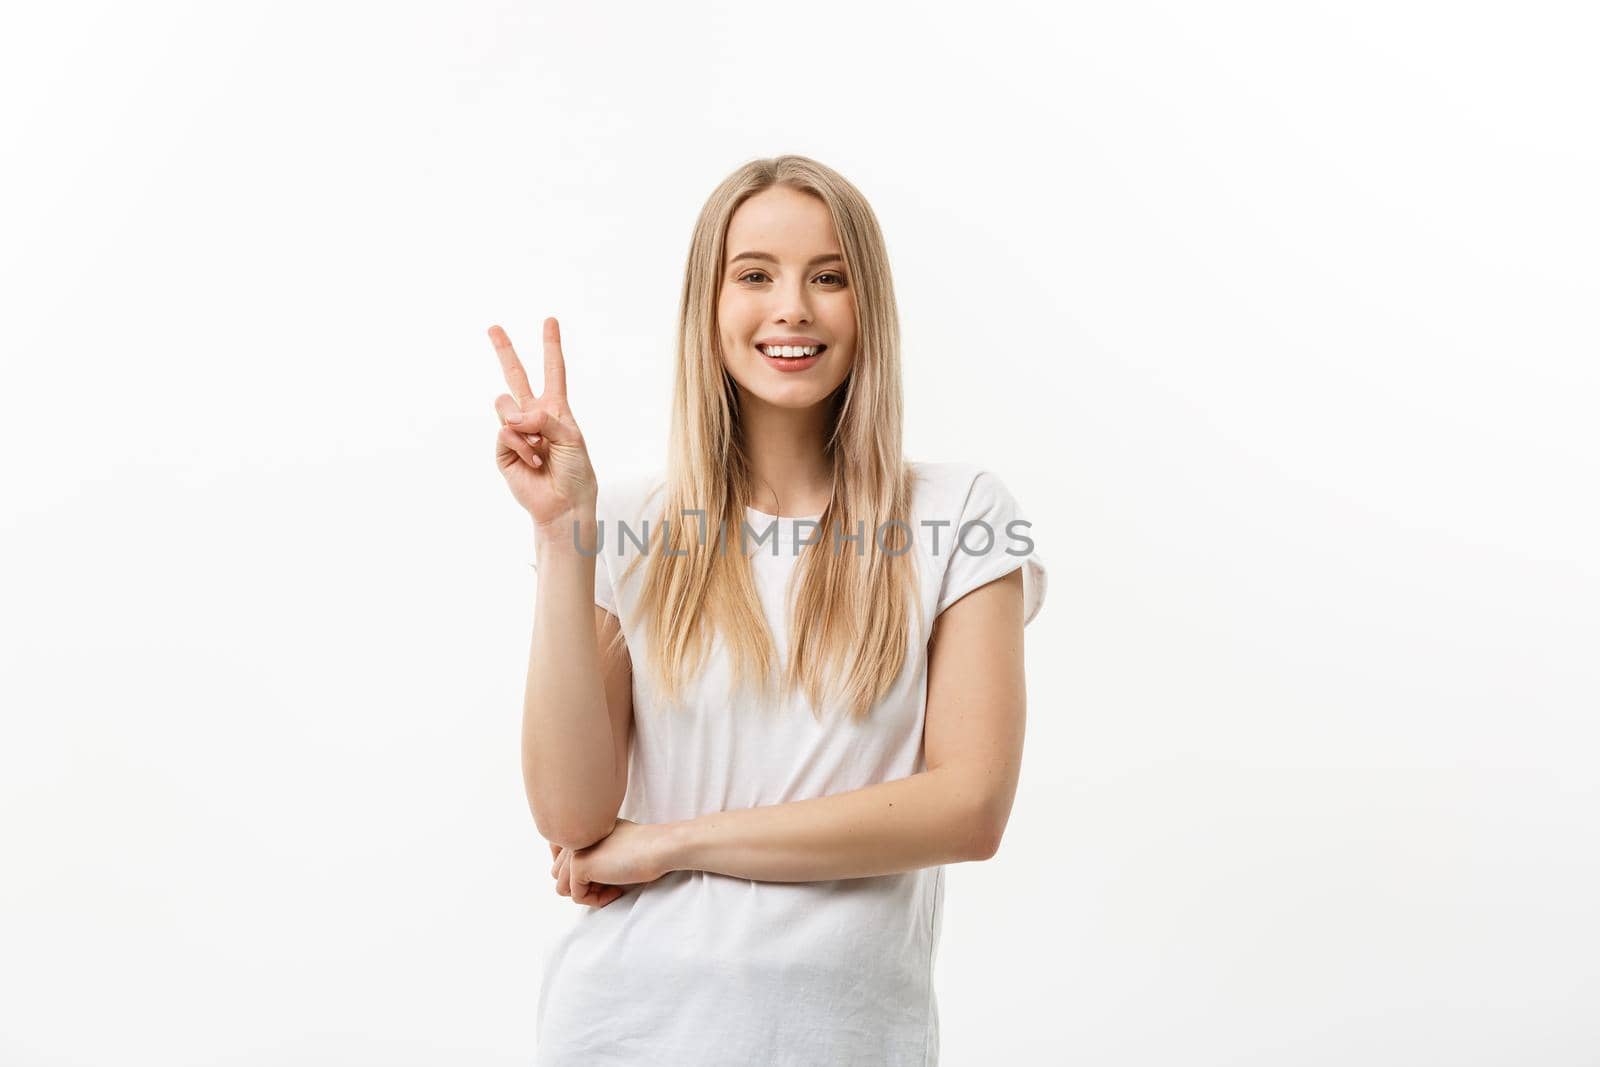 Closeup portrait young happy confident woman giving peace victory, two sign gesture, isolated white studio background. Positive emotion facial expression feelings symbols, attitude.